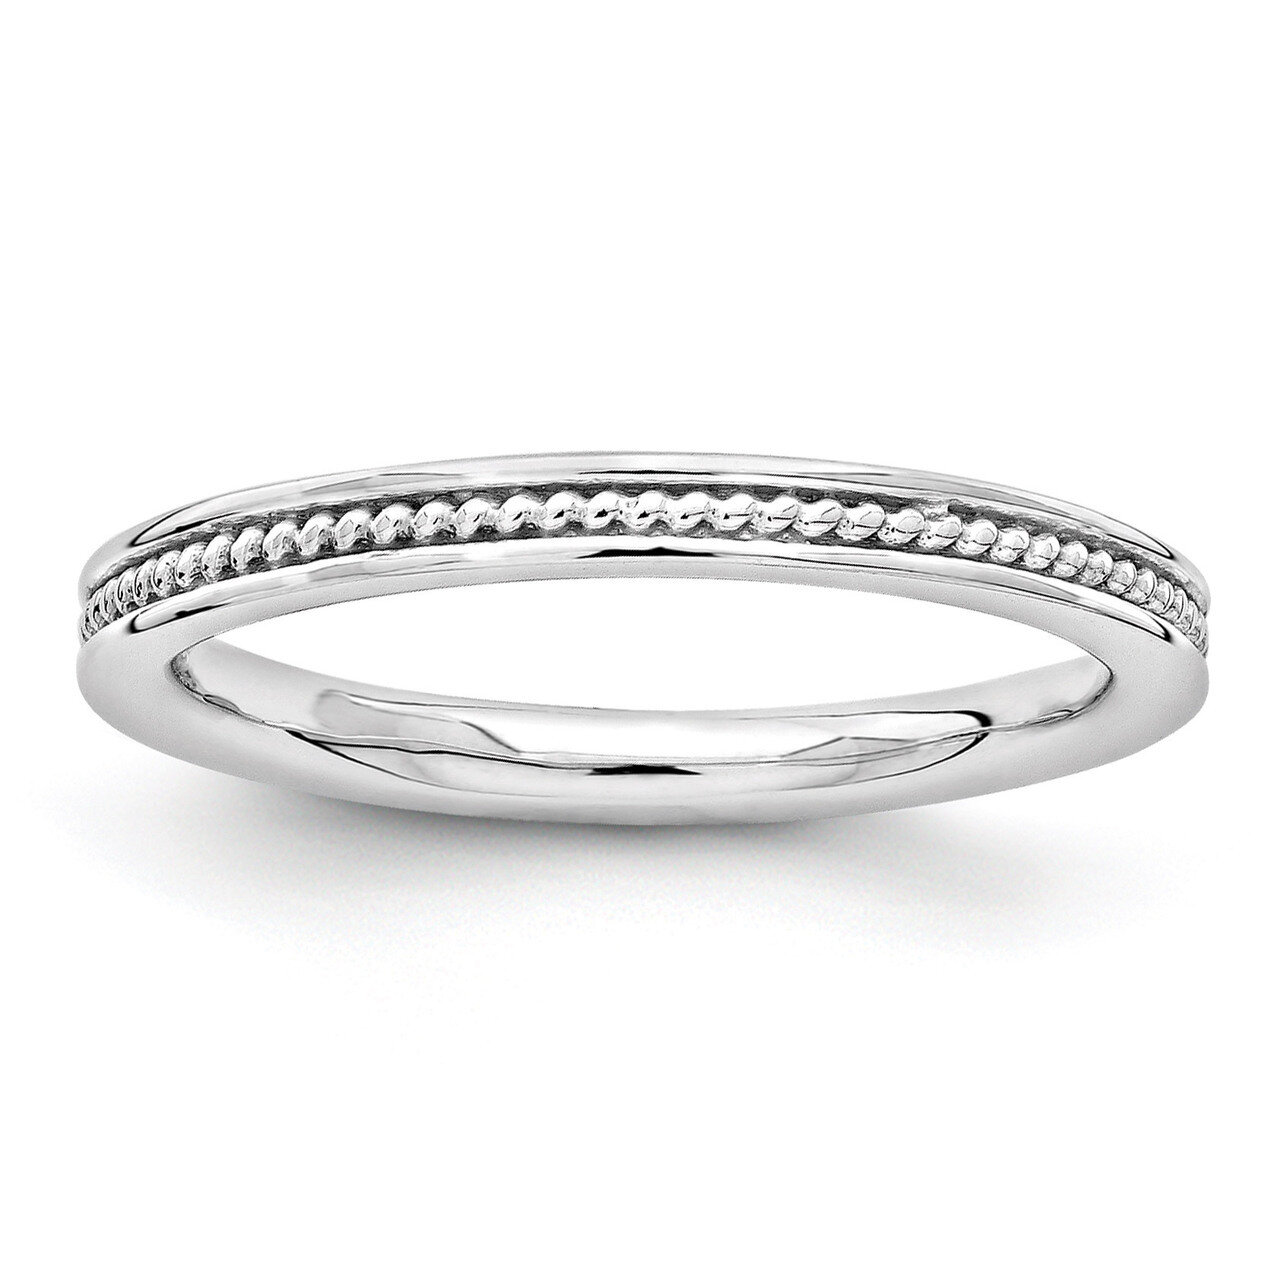 Channeled Ring - Sterling Silver Rhodium-plated QSK1619